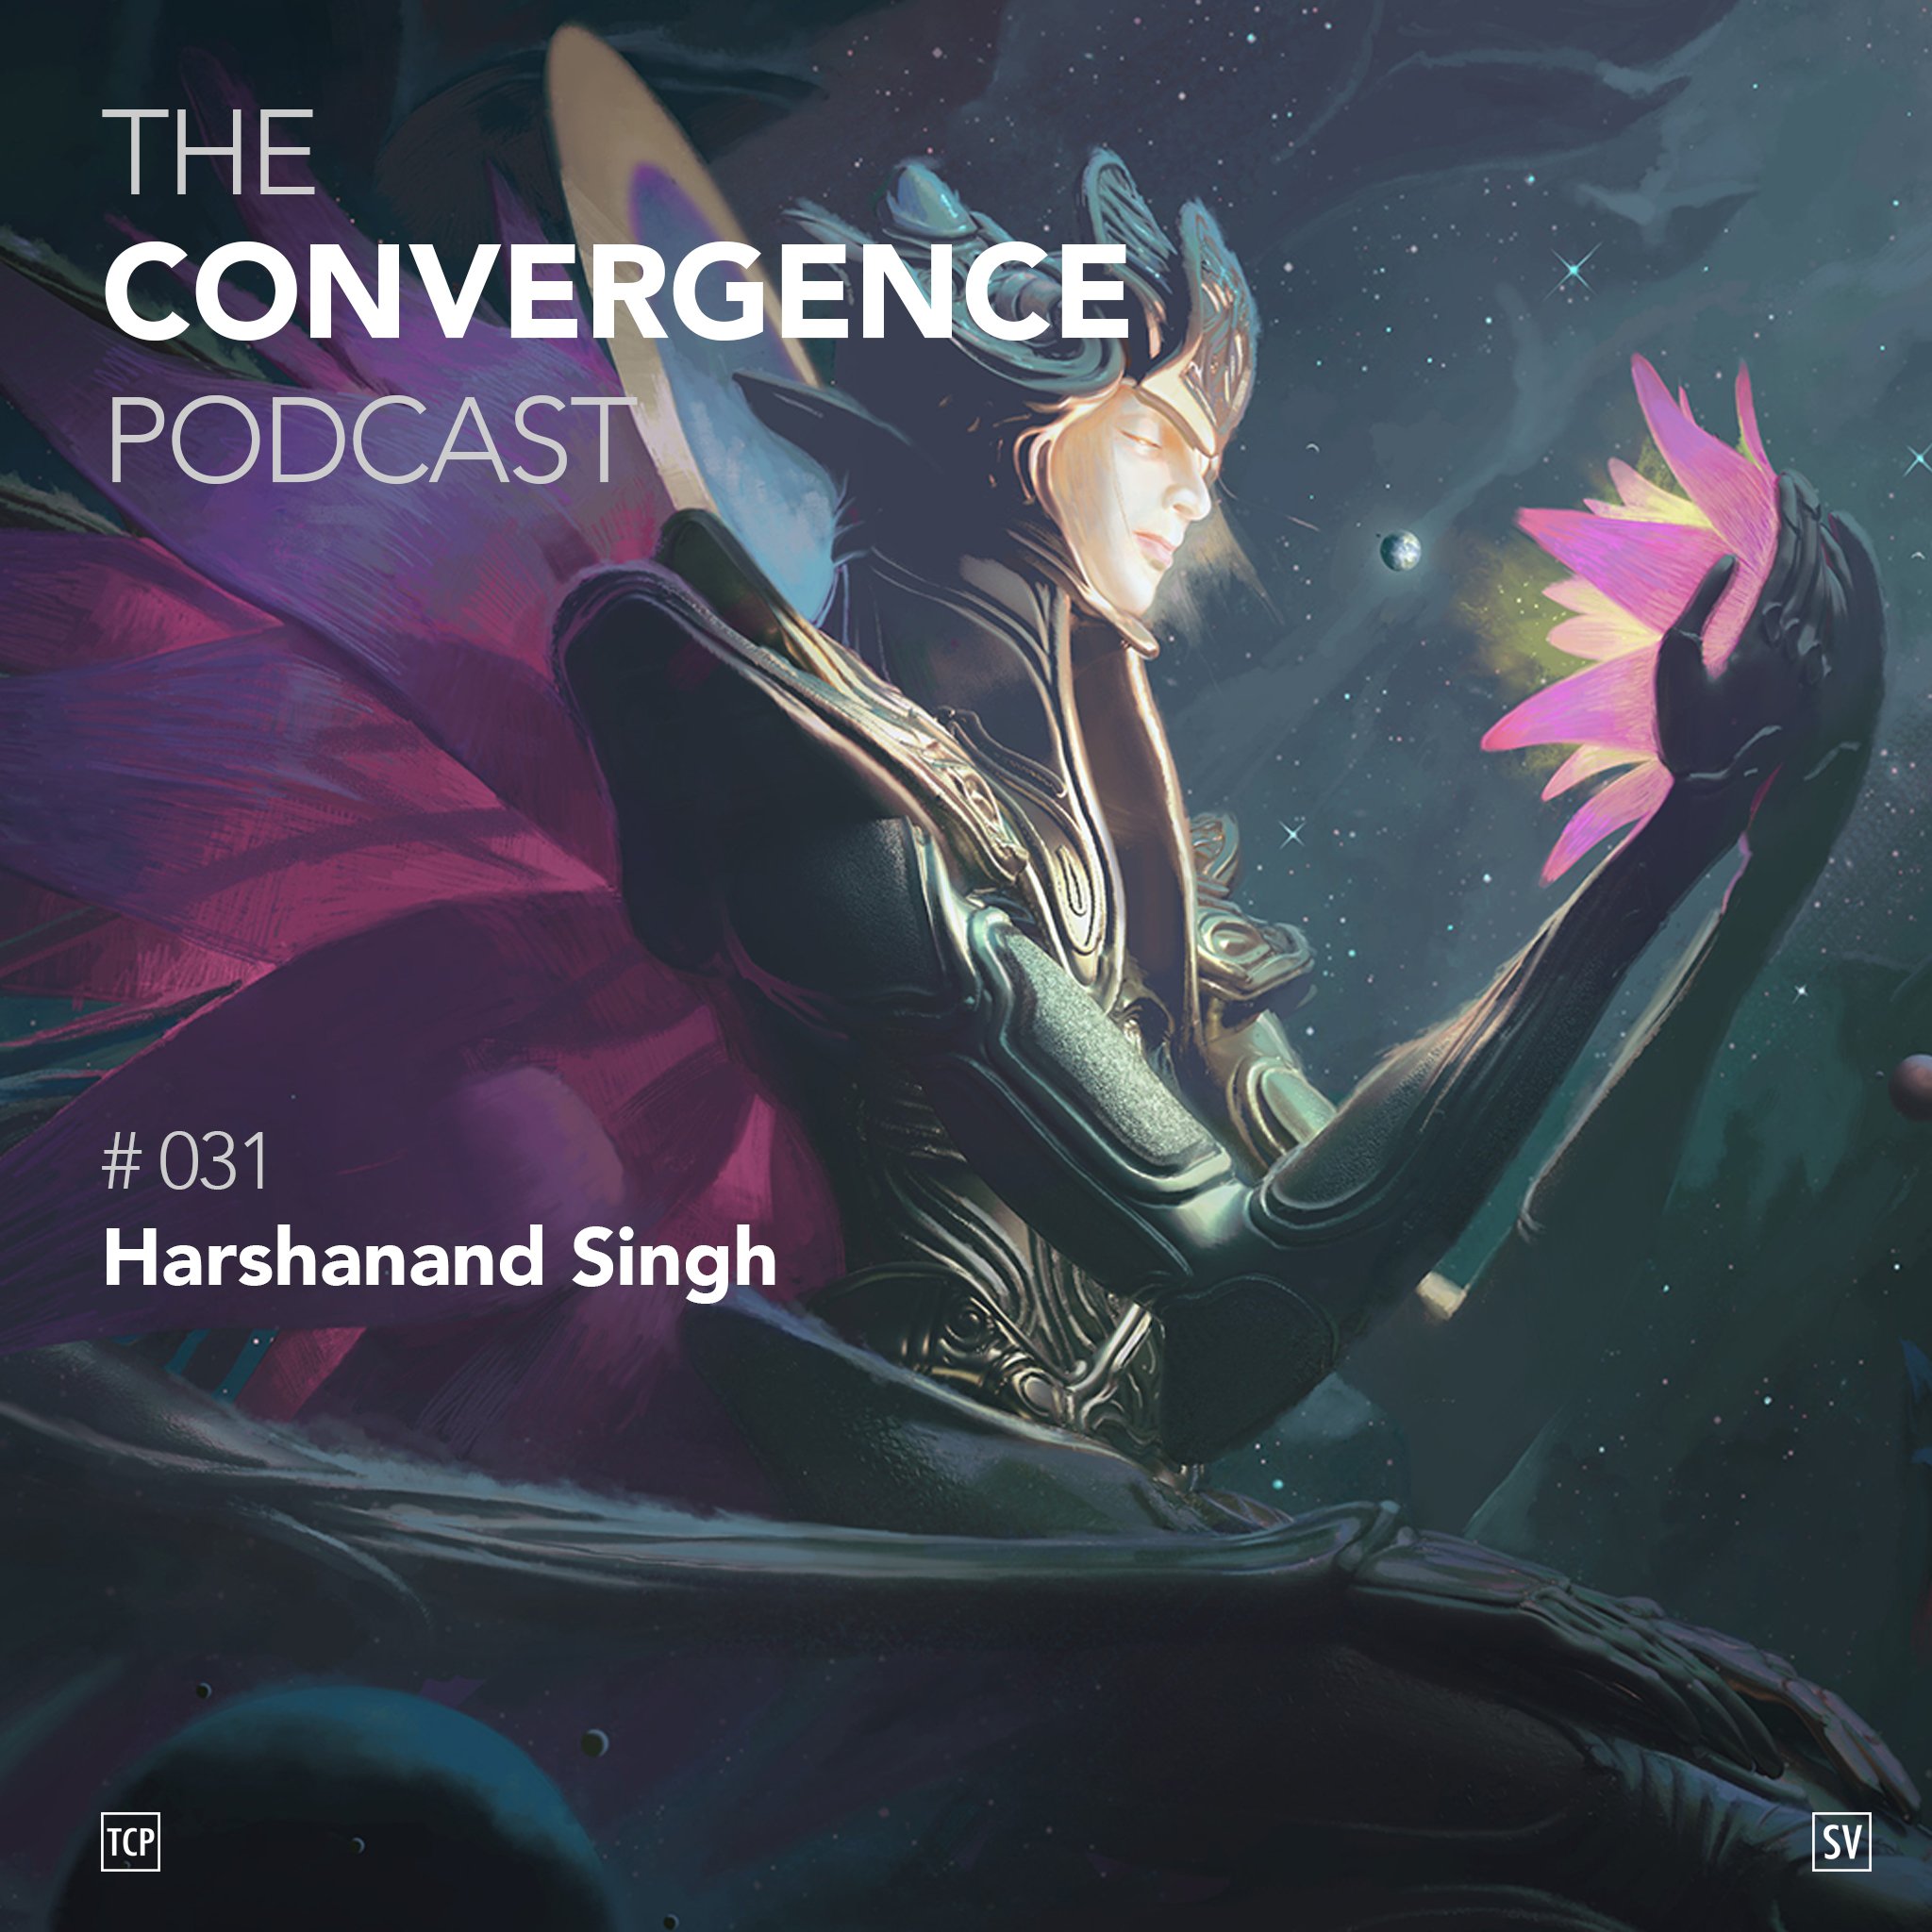 TheConvergencePodcast#031_Harshanand Singh.jpg